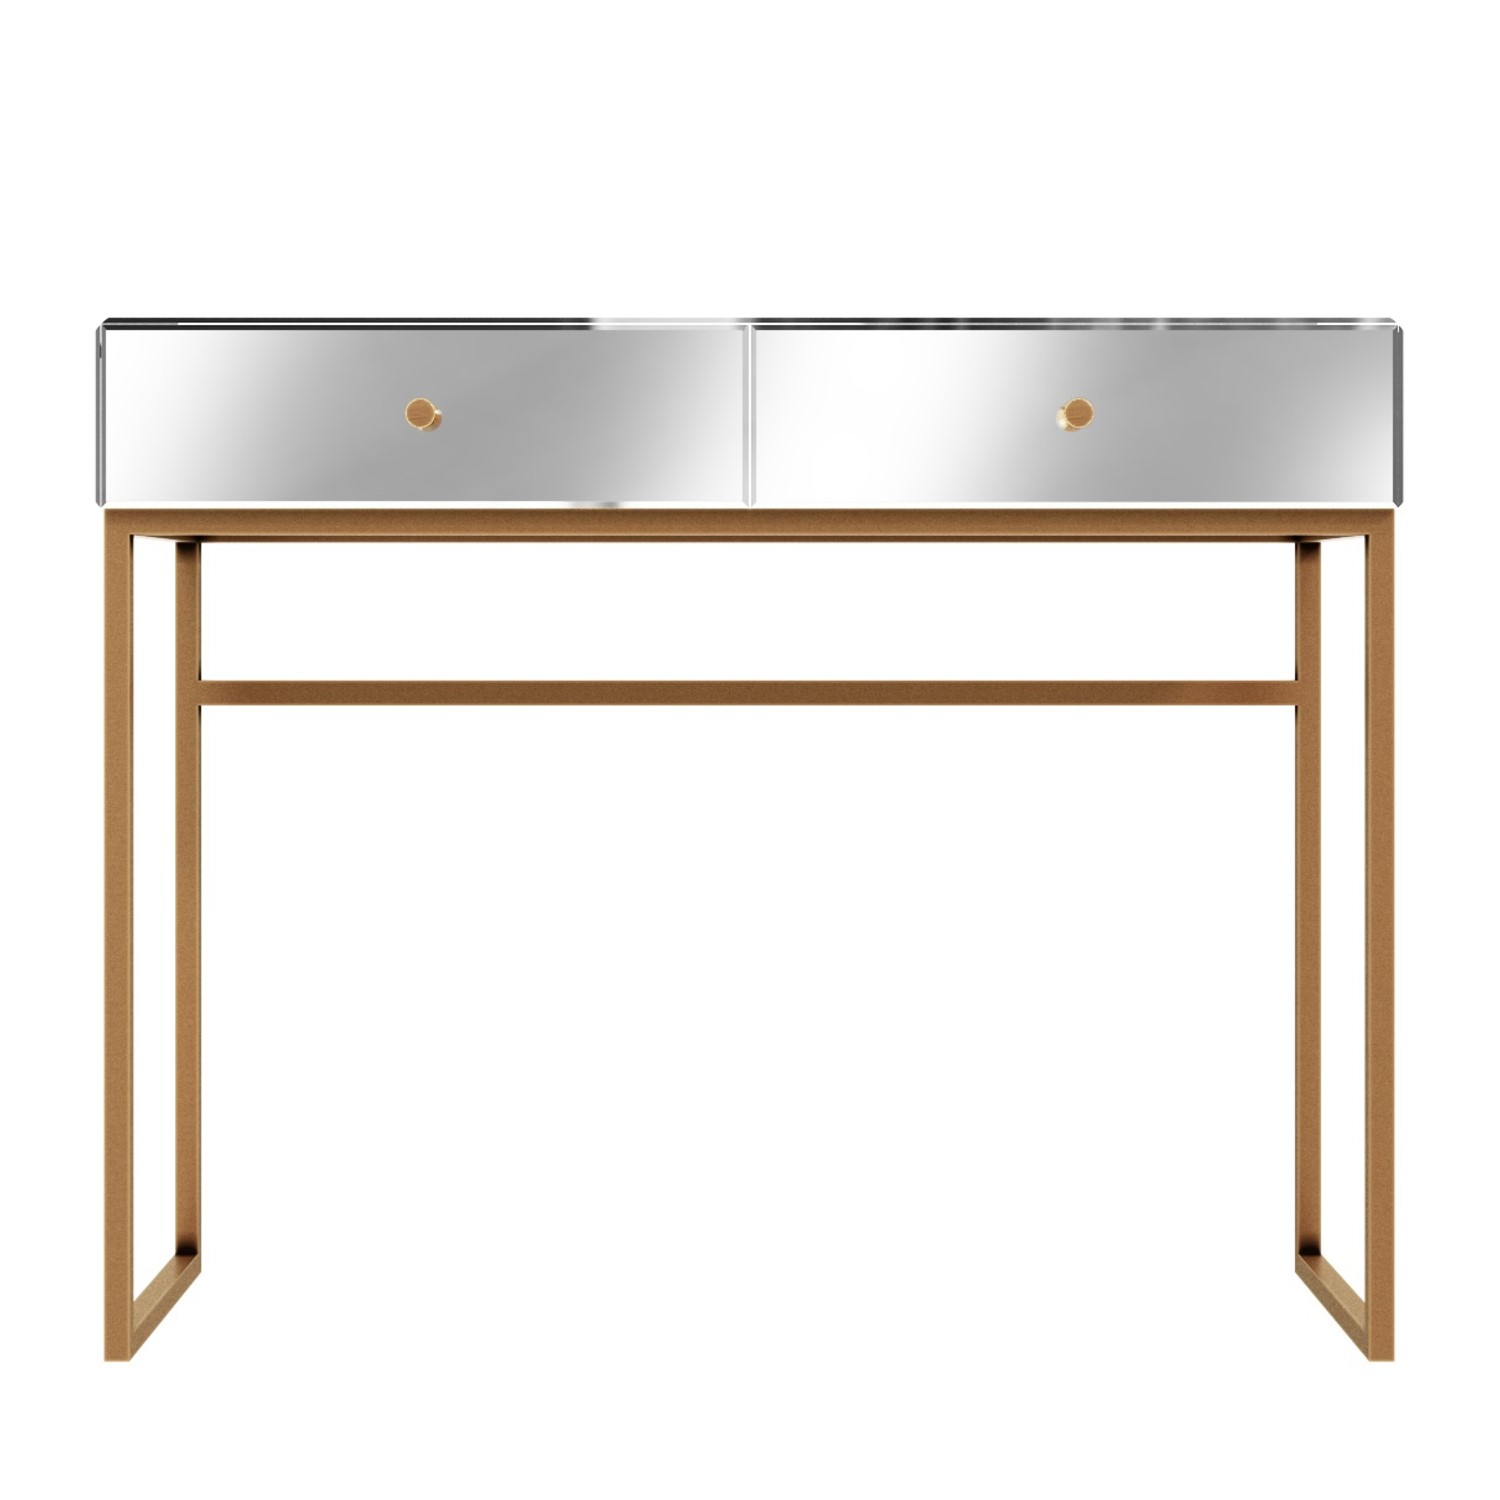 Read more about Mirrored dressing table with 2 drawers lola